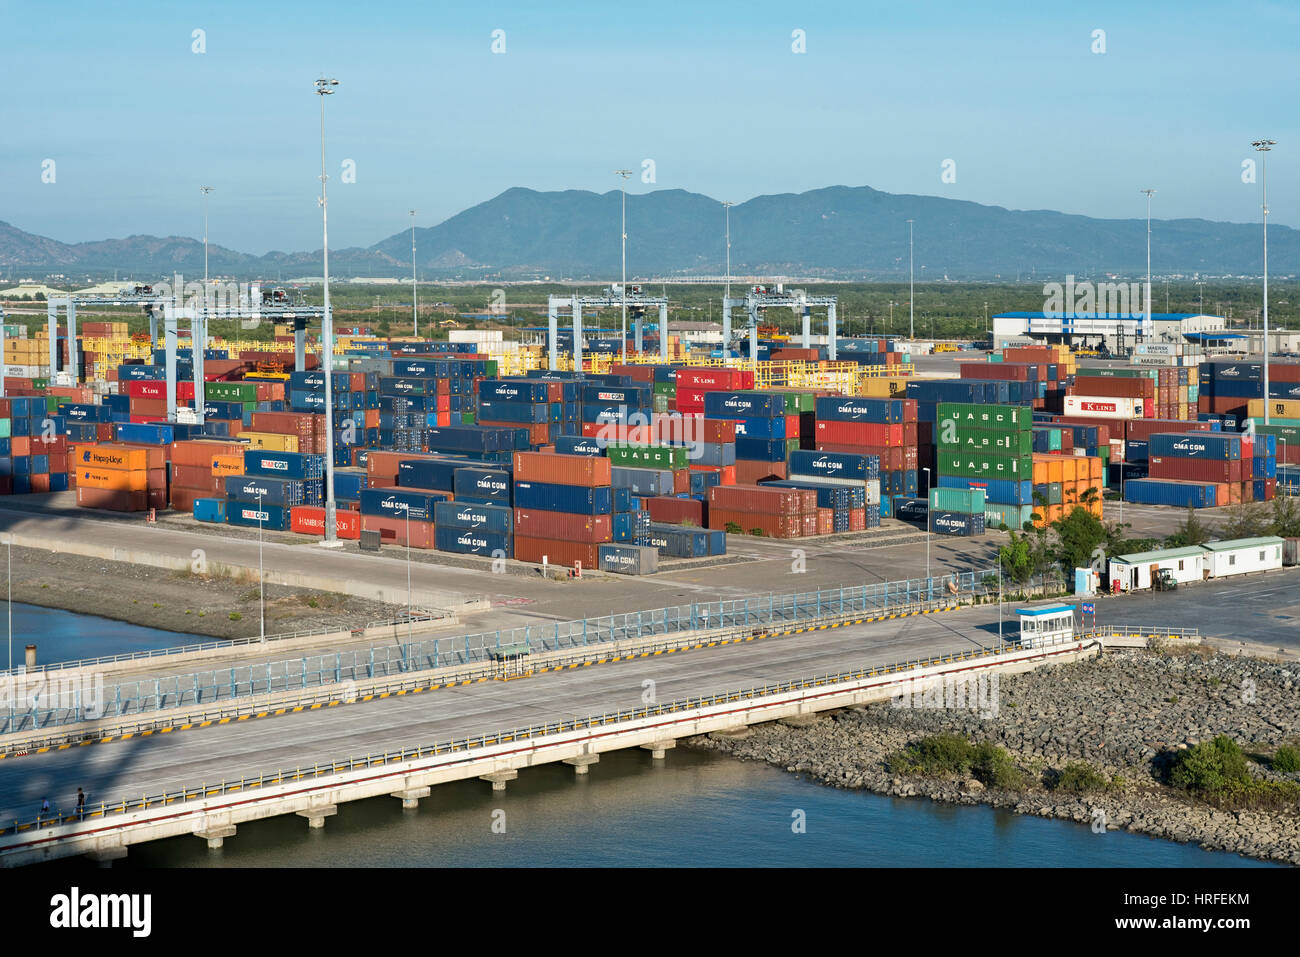 Aerial view of the Cai Mep International Terminal in Vietnam with containers stacked in rows on a sunny day with blue sky. Stock Photo